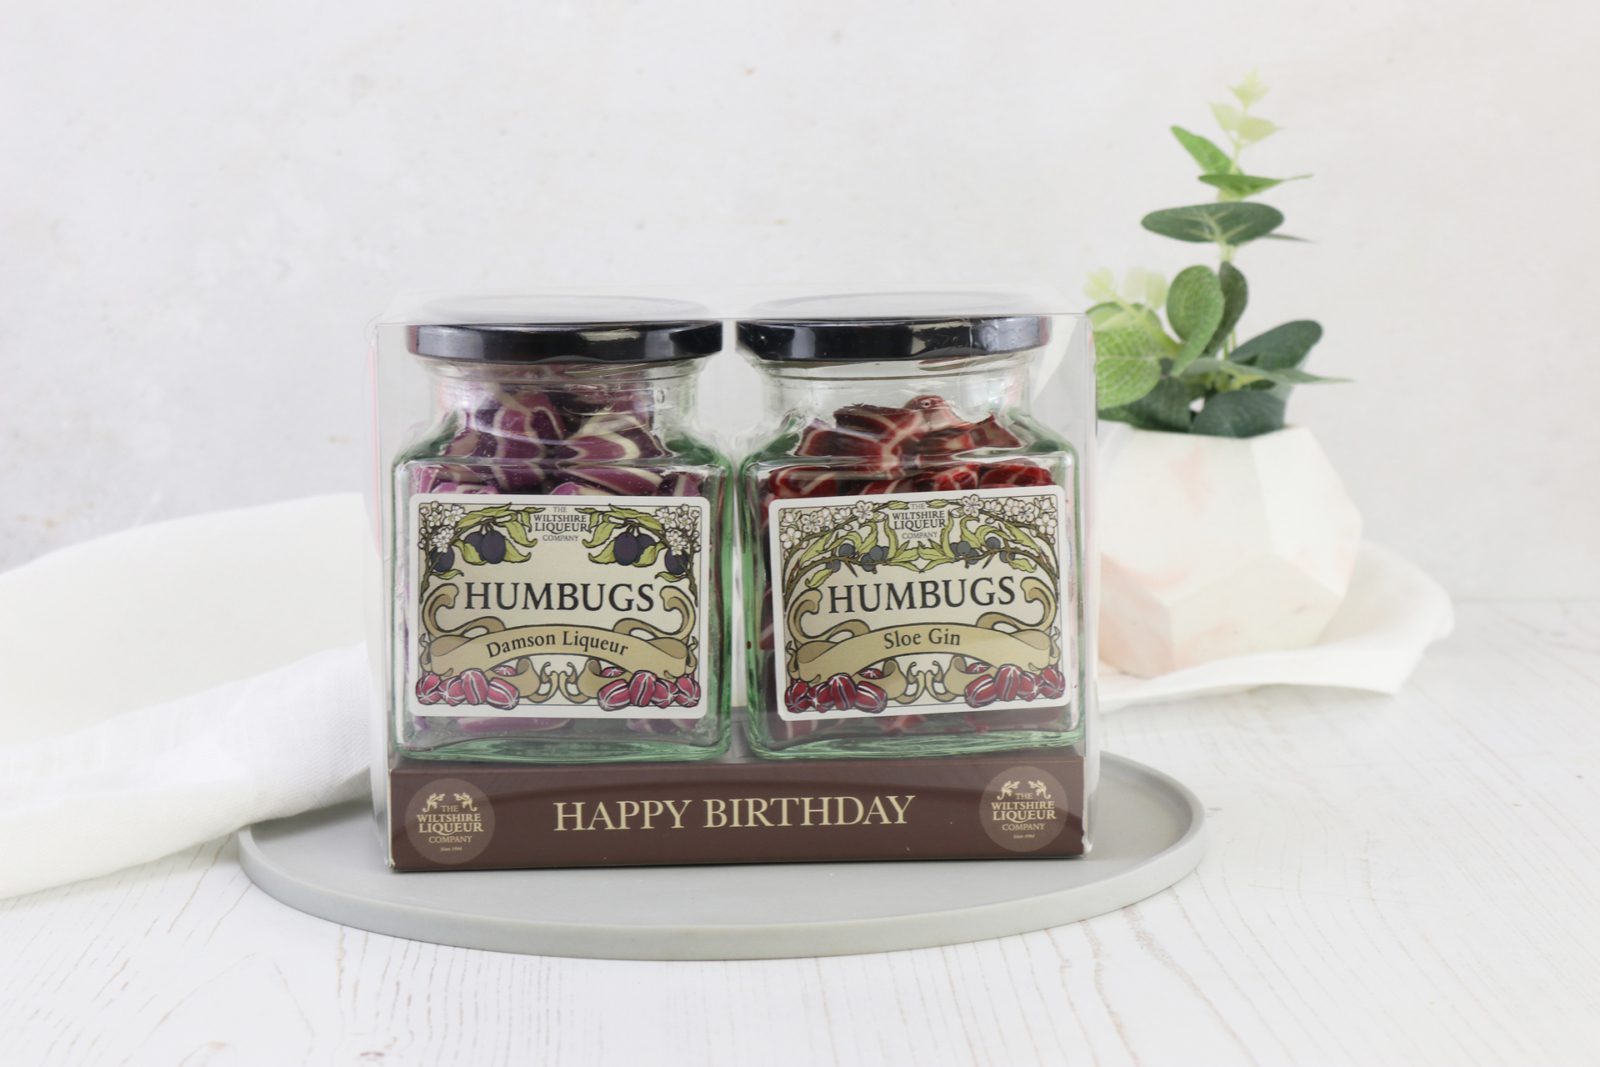 Two jars of Liqueur humbugs with a personalised label that reads: happy birthday. The gift set sits on a white table.